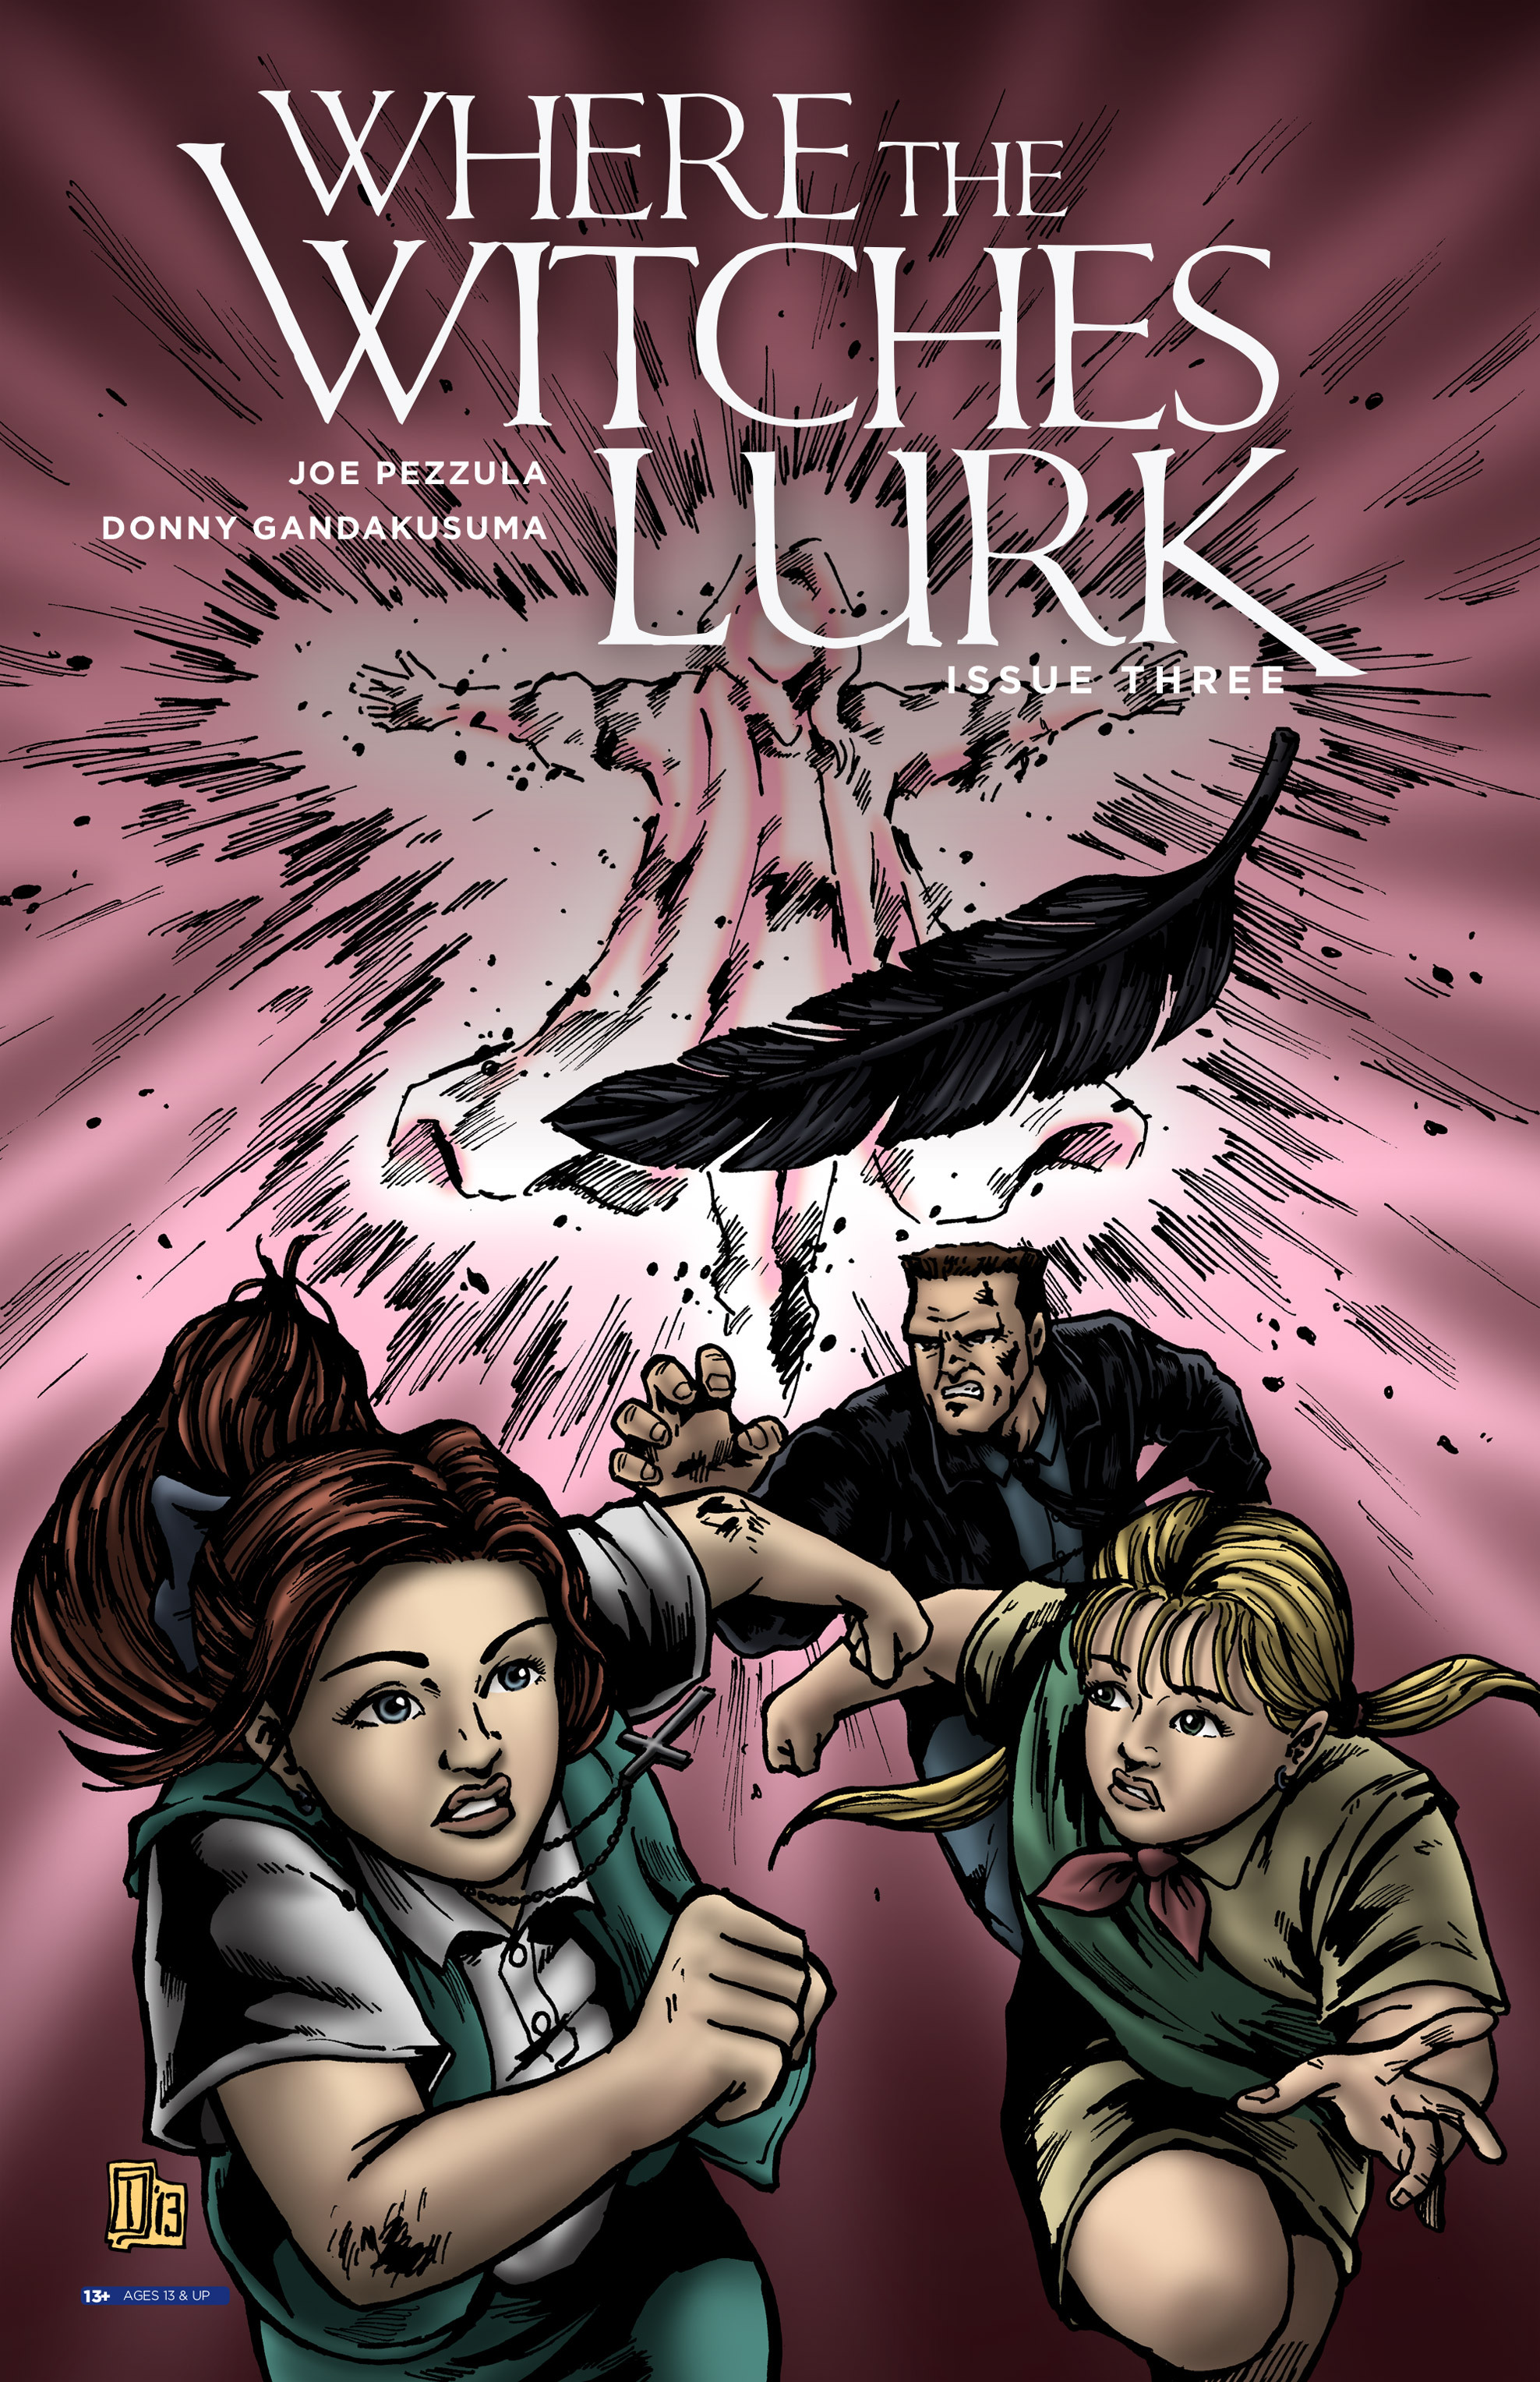 Read online Where the Witches Lurk comic -  Issue #3 - 1